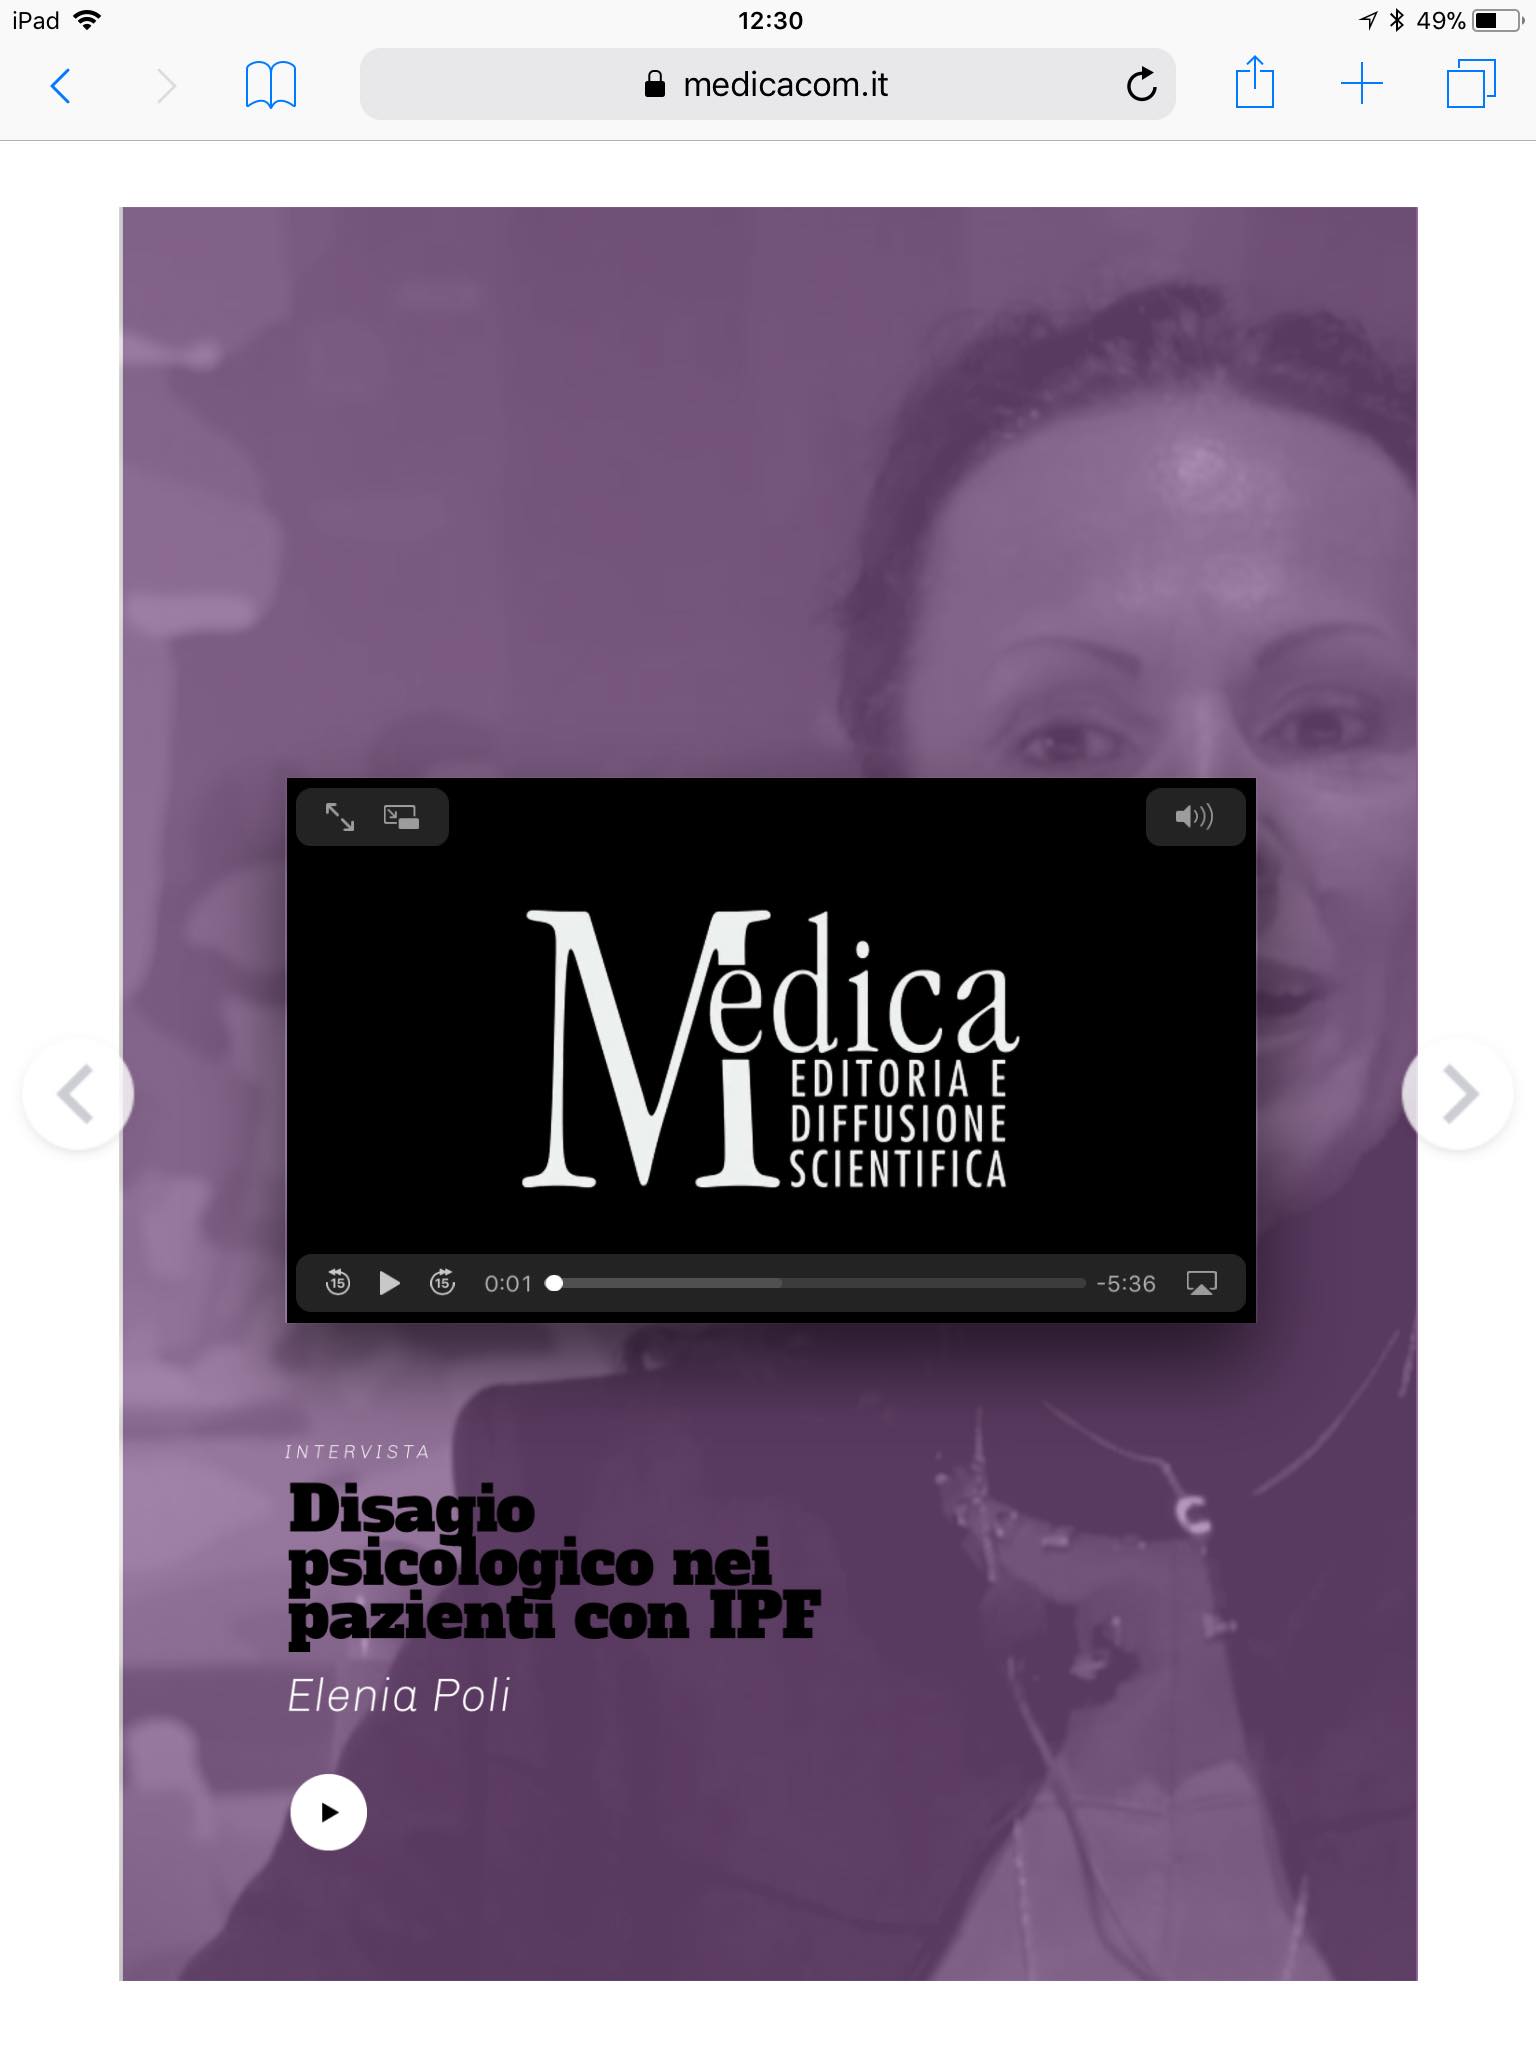 Example image on a tablet screen of INFO MEDICAL